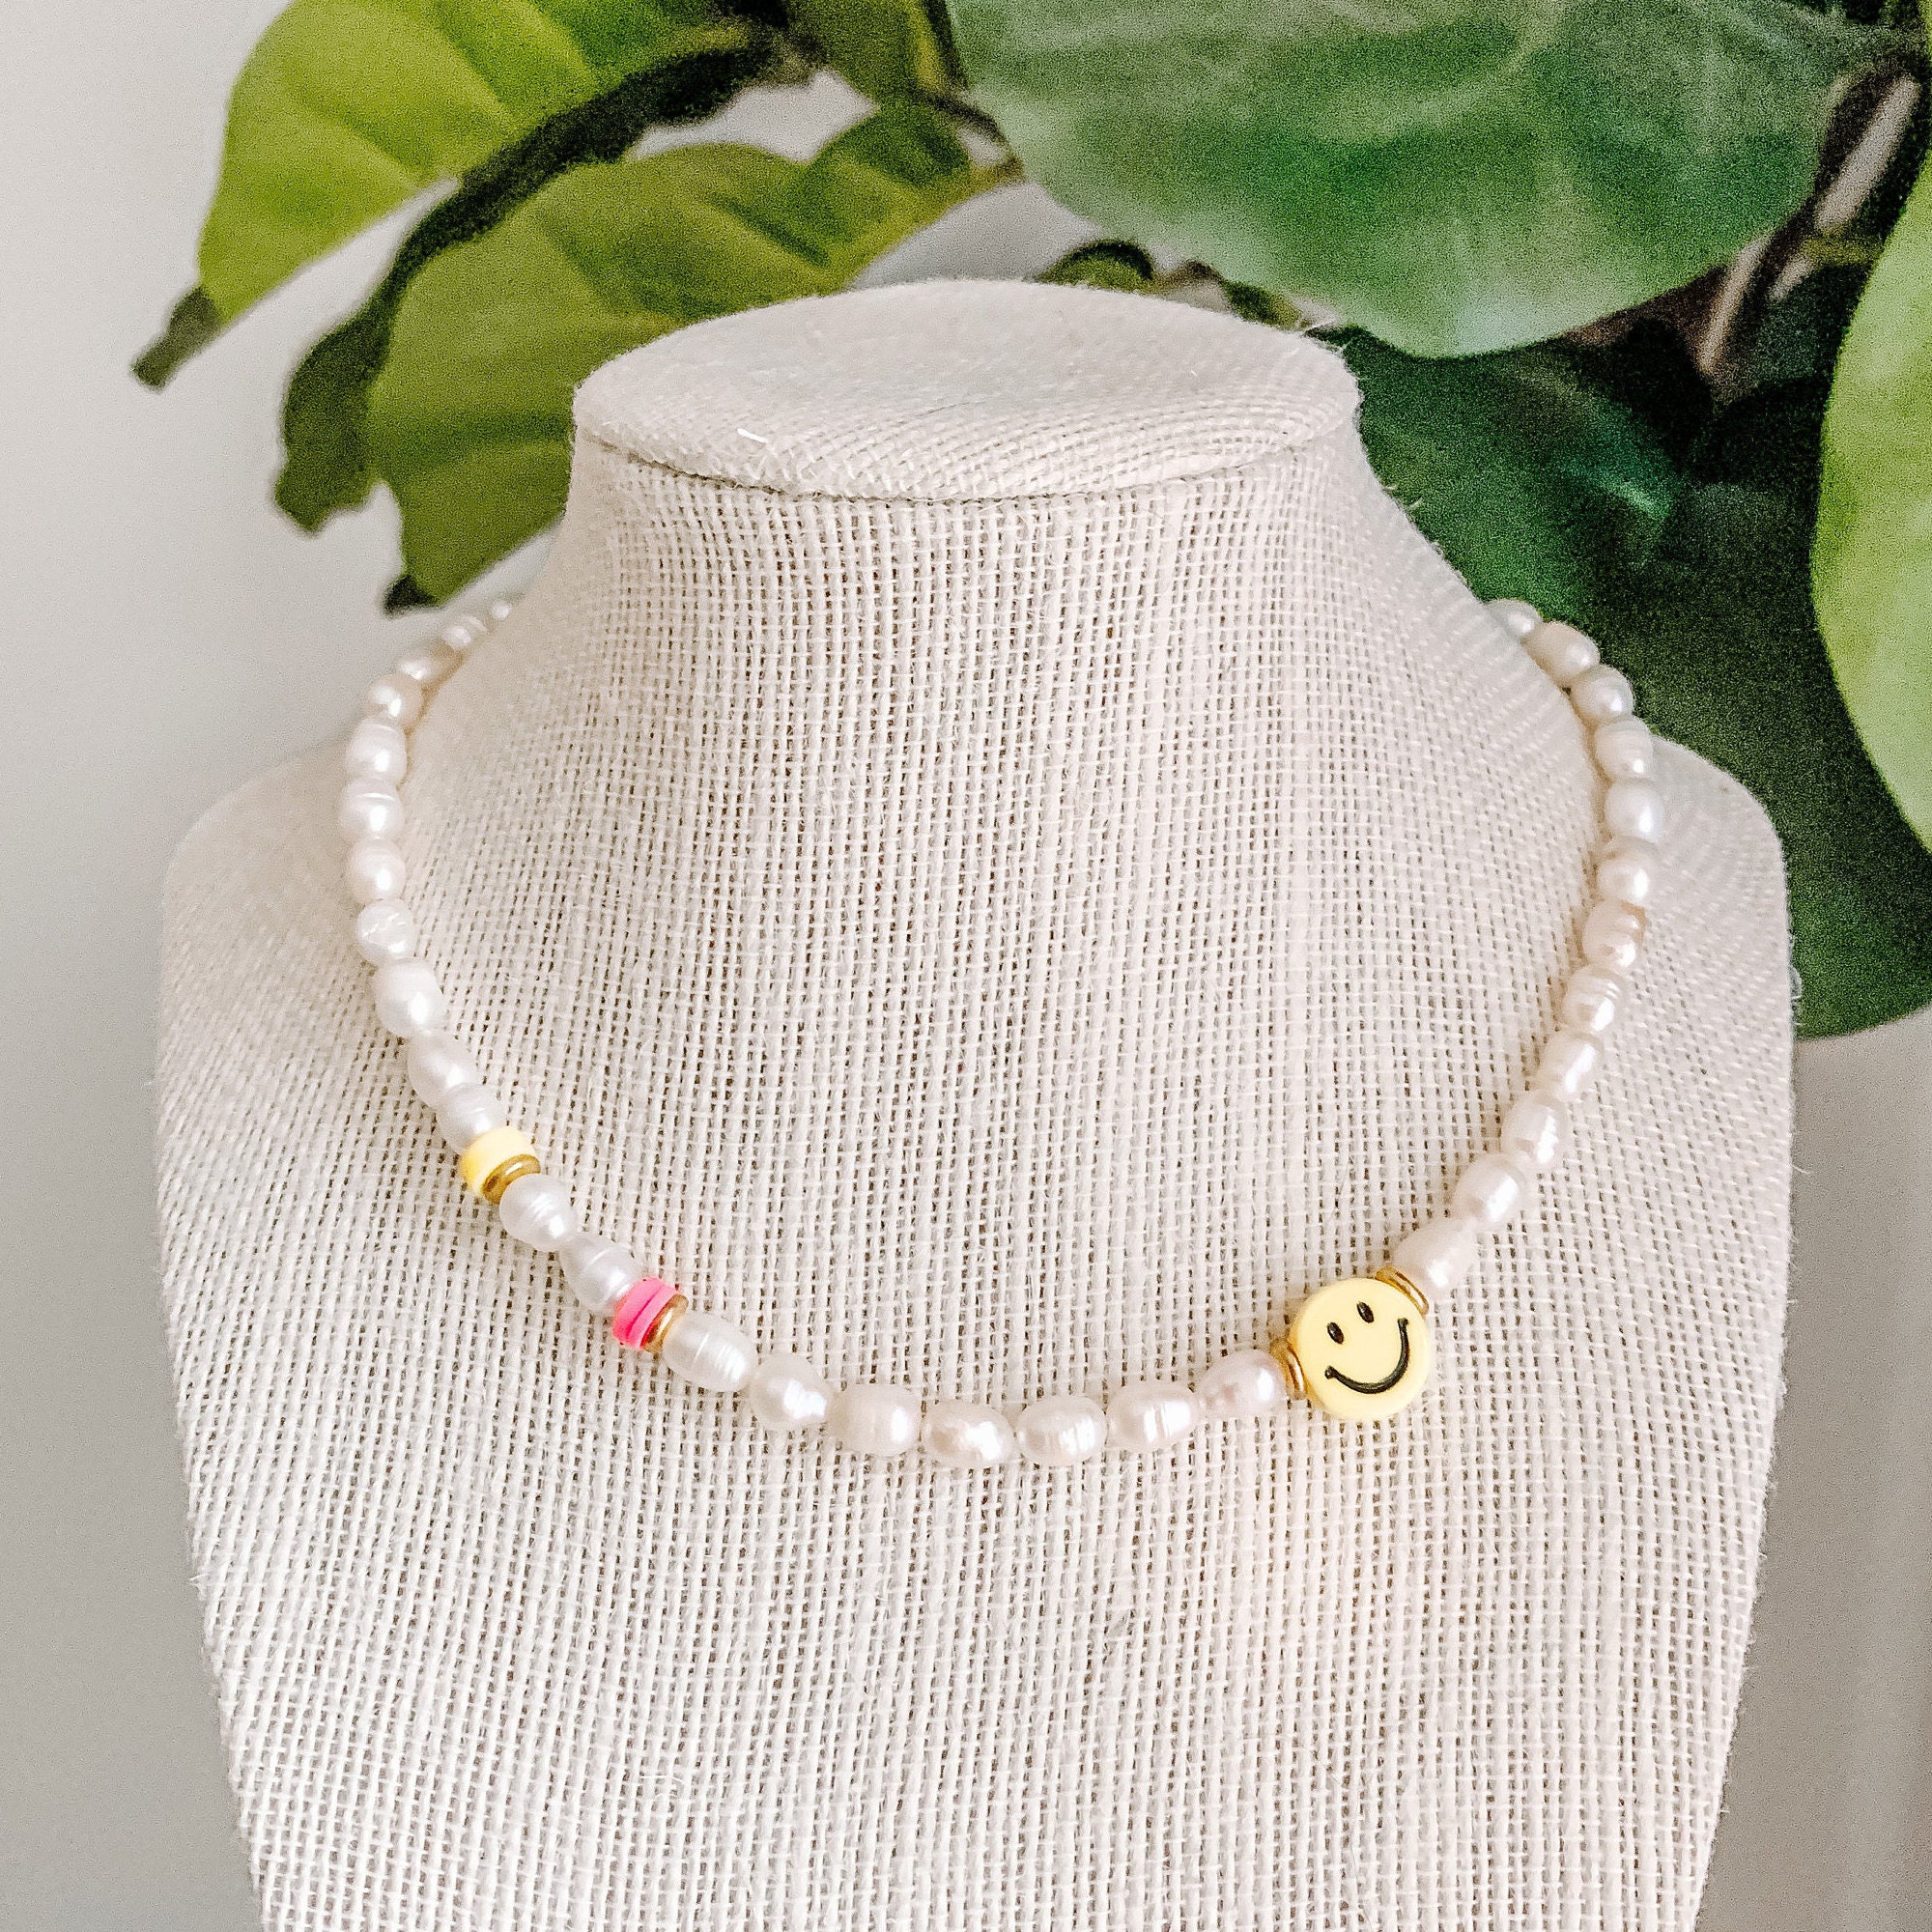 Smiley Face Necklace, Happy Face Choker Necklace, Colorful Letter Necklace,  Initial Jewelry, Pearl Choker Necklace, Beaded Necklace - Etsy | Beaded  bracelets, Beaded necklace diy, Beaded jewelry diy